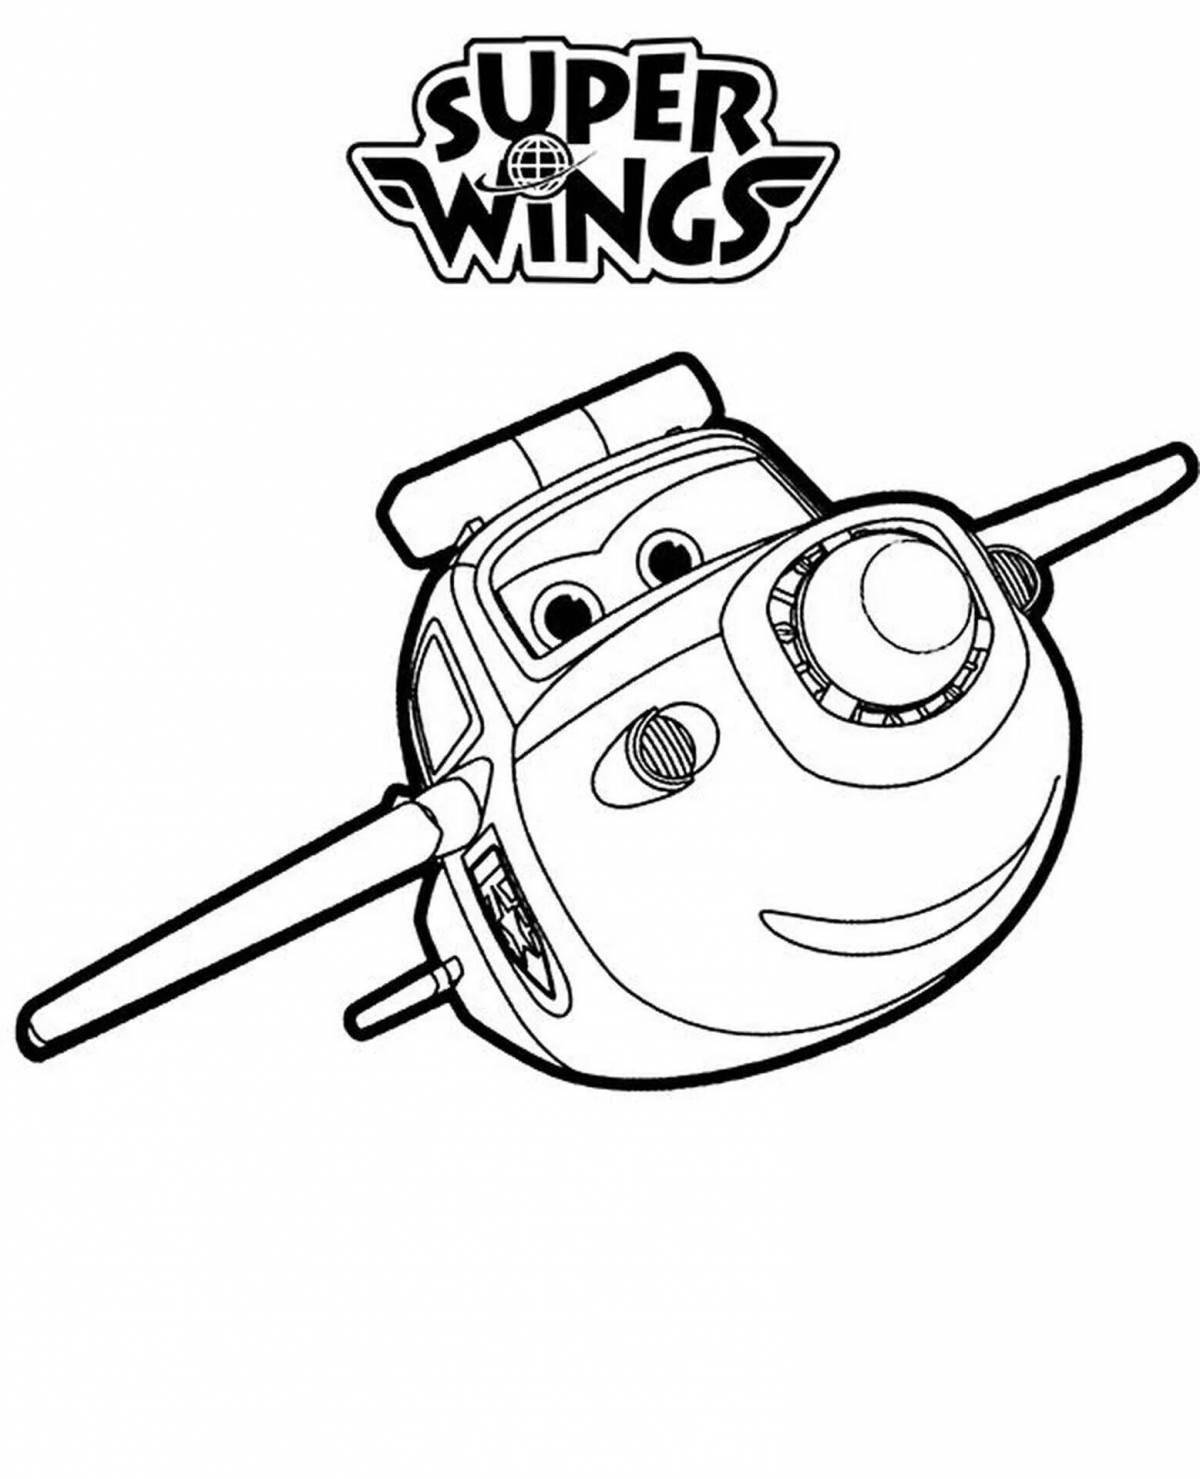 Cute donnie super wings coloring page